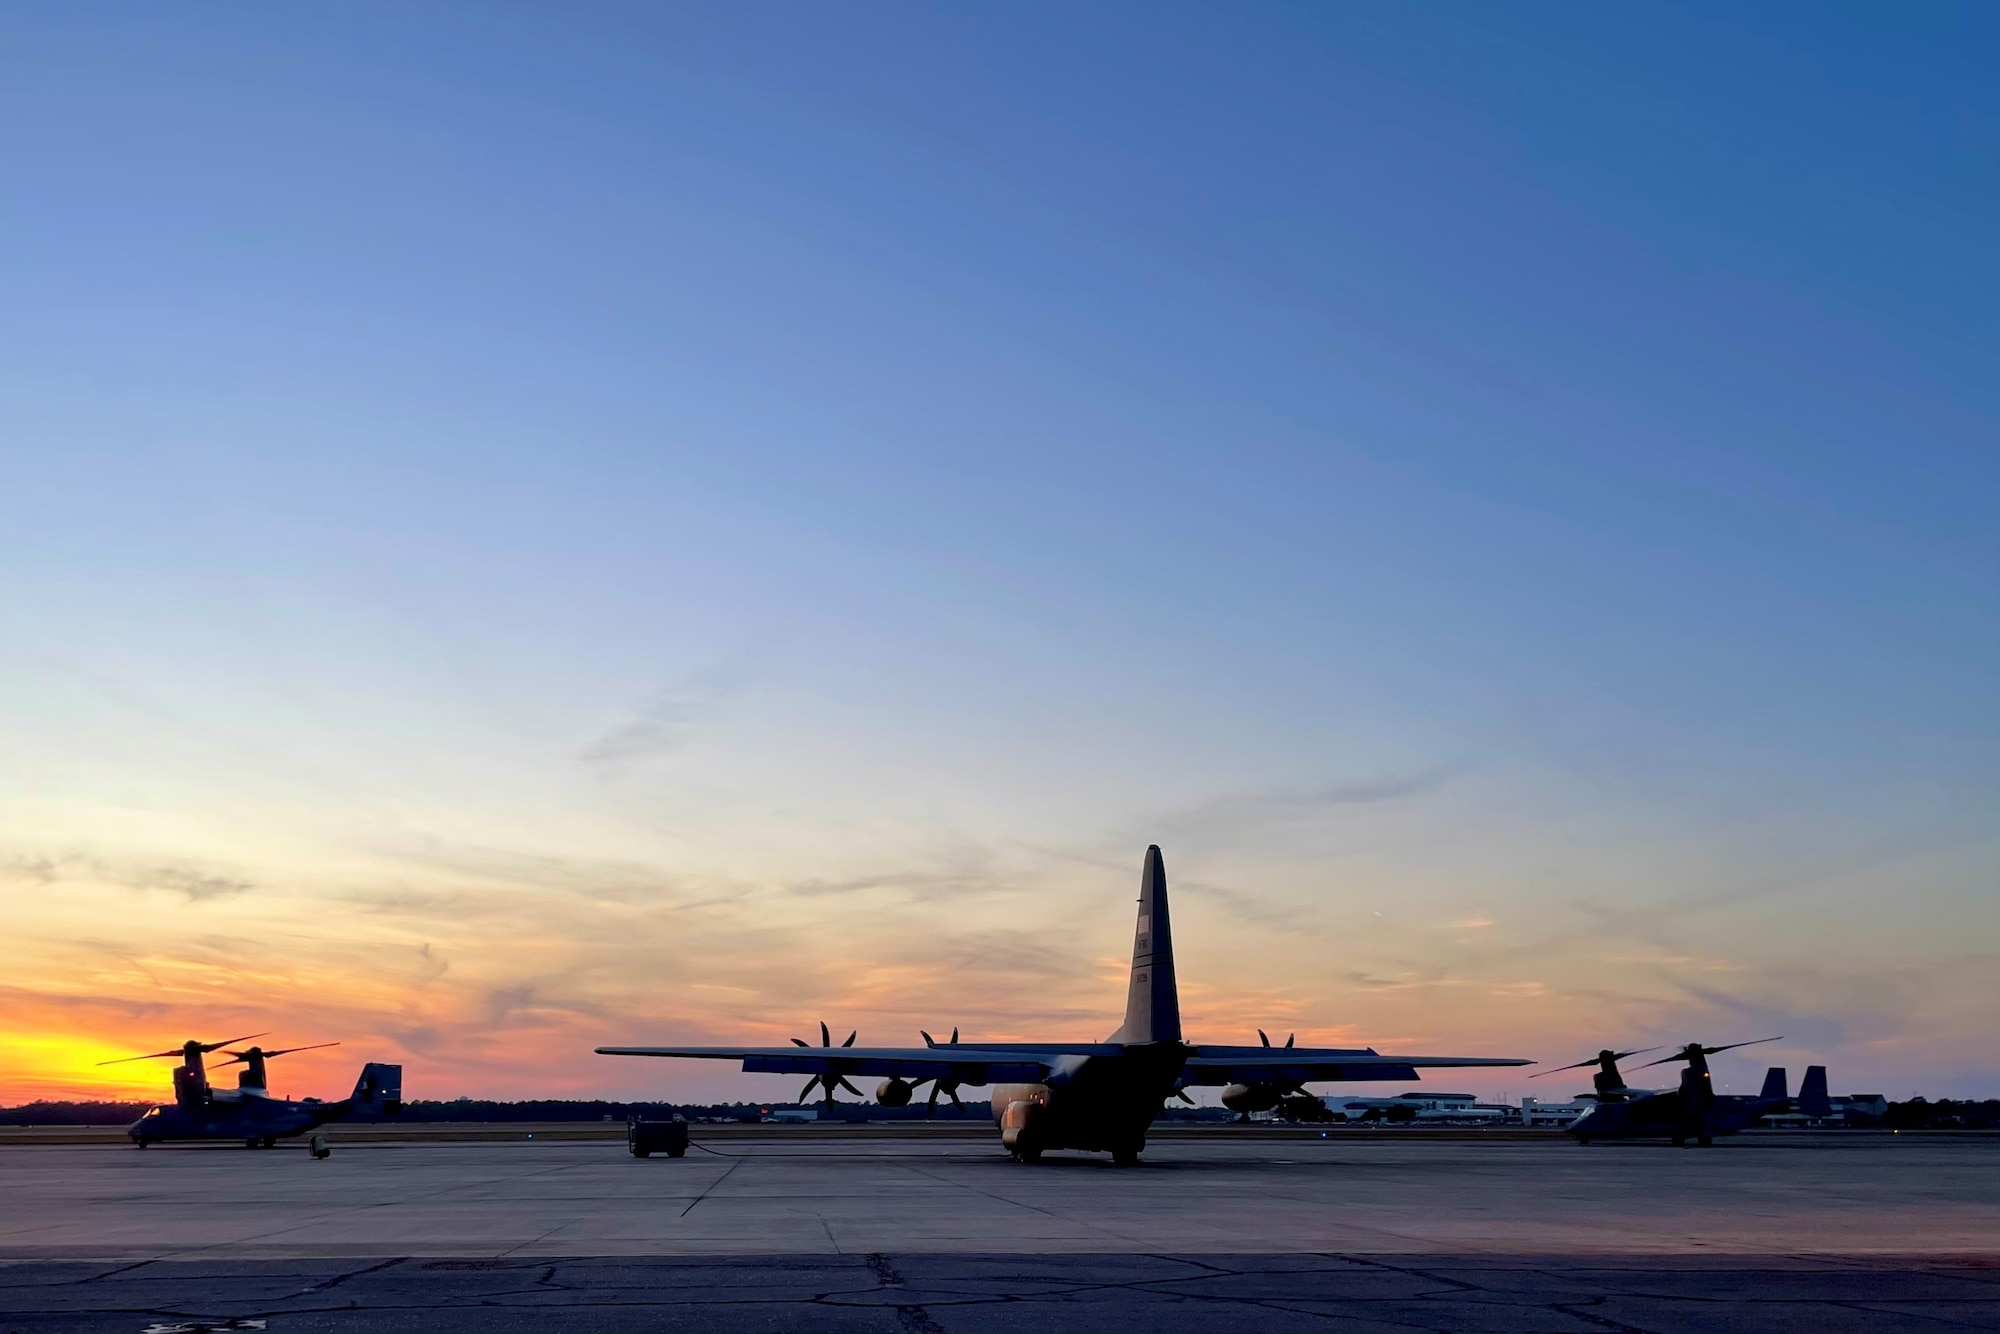 a C-130 is parked on a flight line during sunset while two MC-22s prepare to taxi